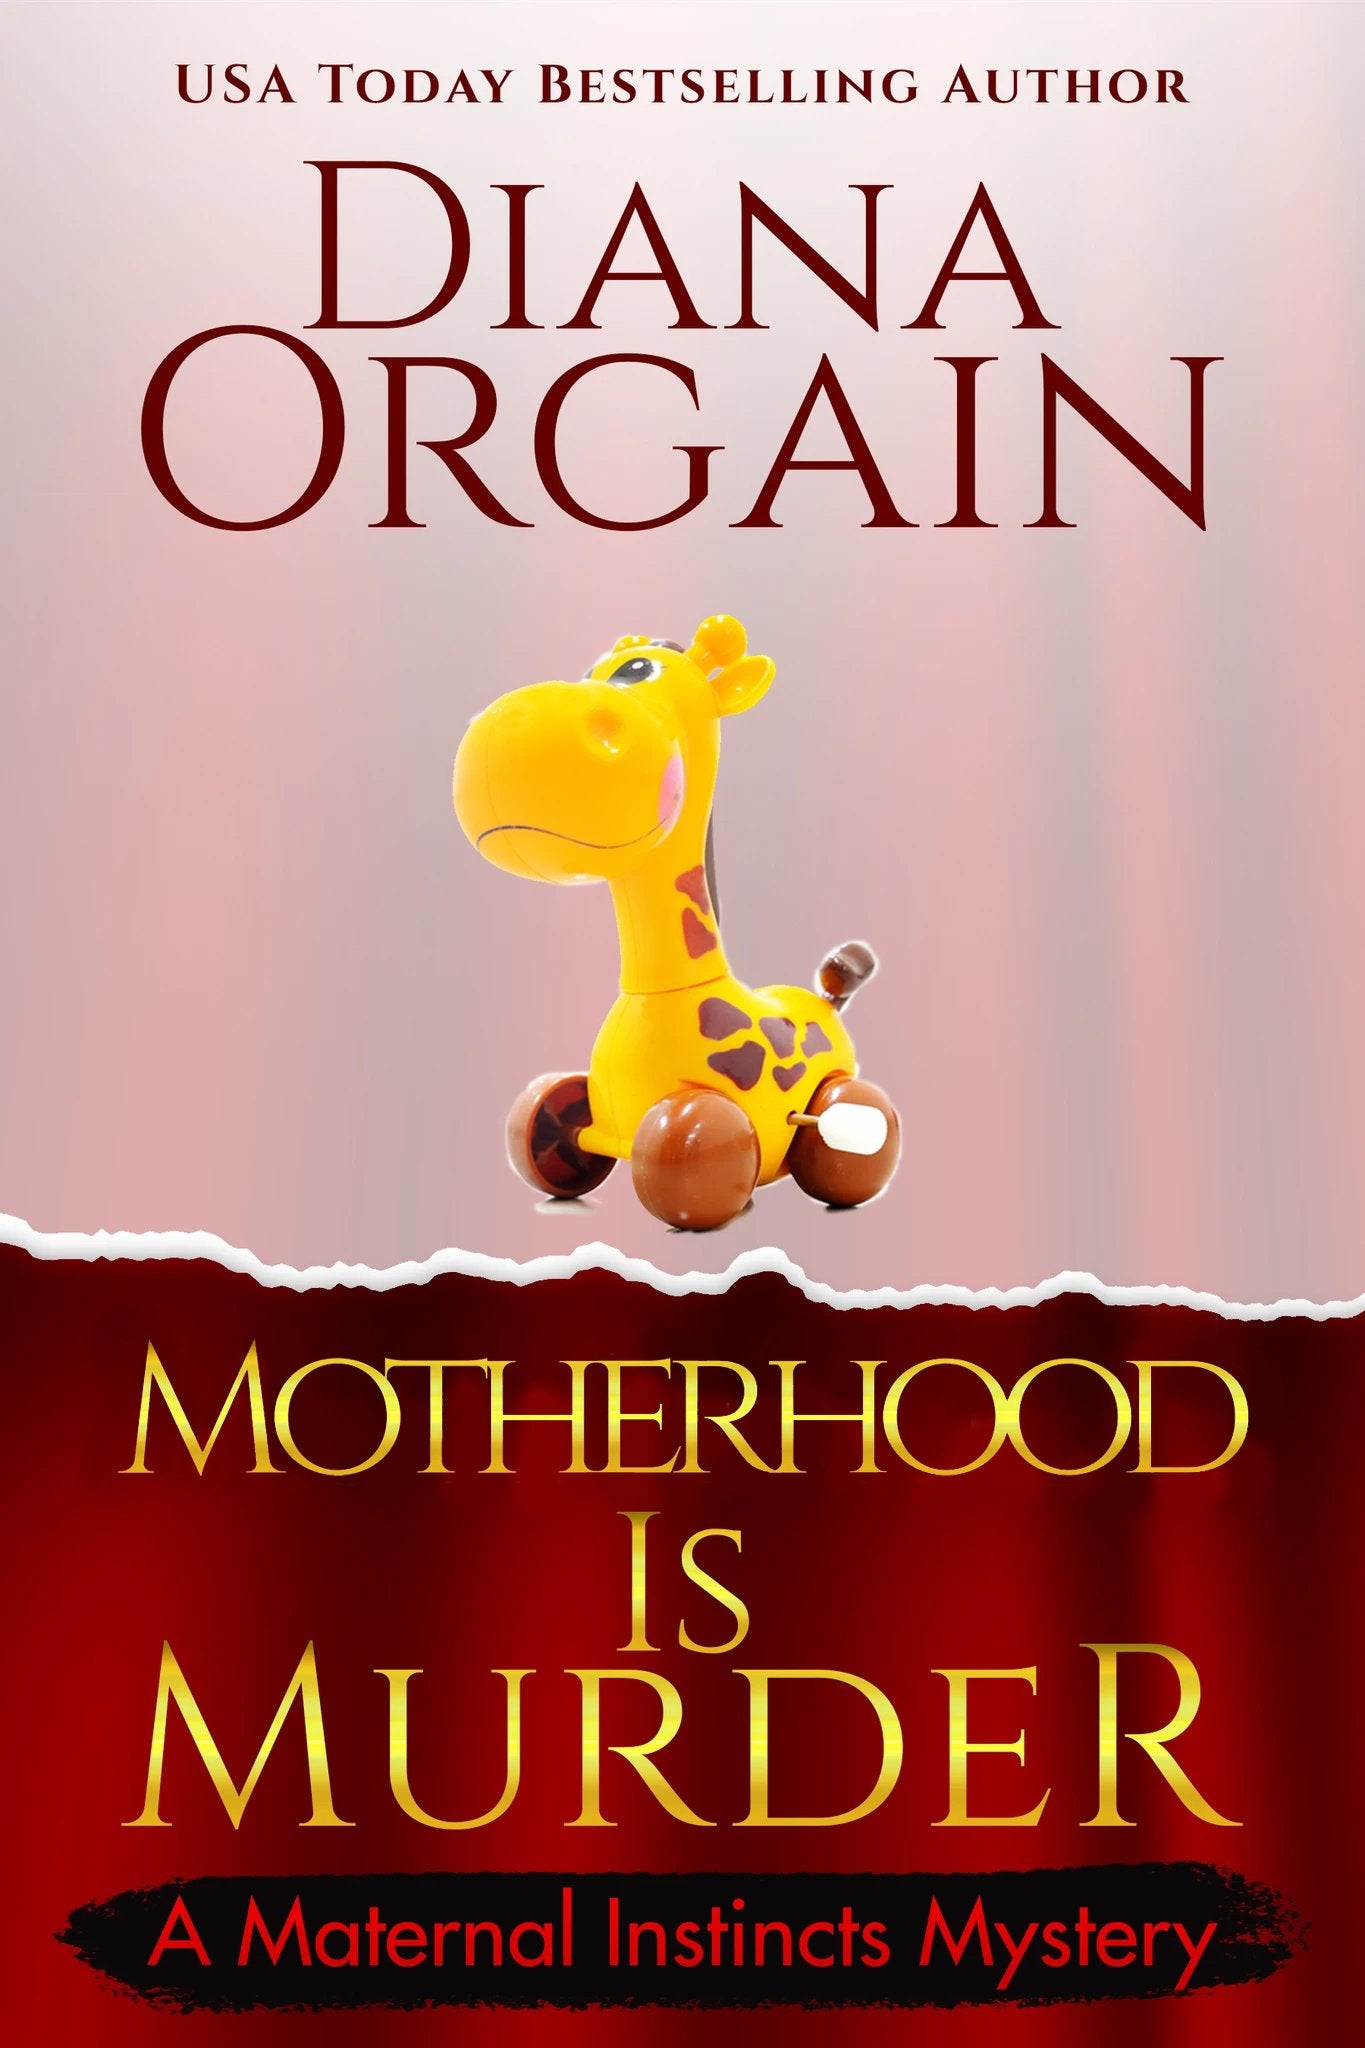 Maternal Instincts Mystery Series Books 1-3 - PRINT EDITION